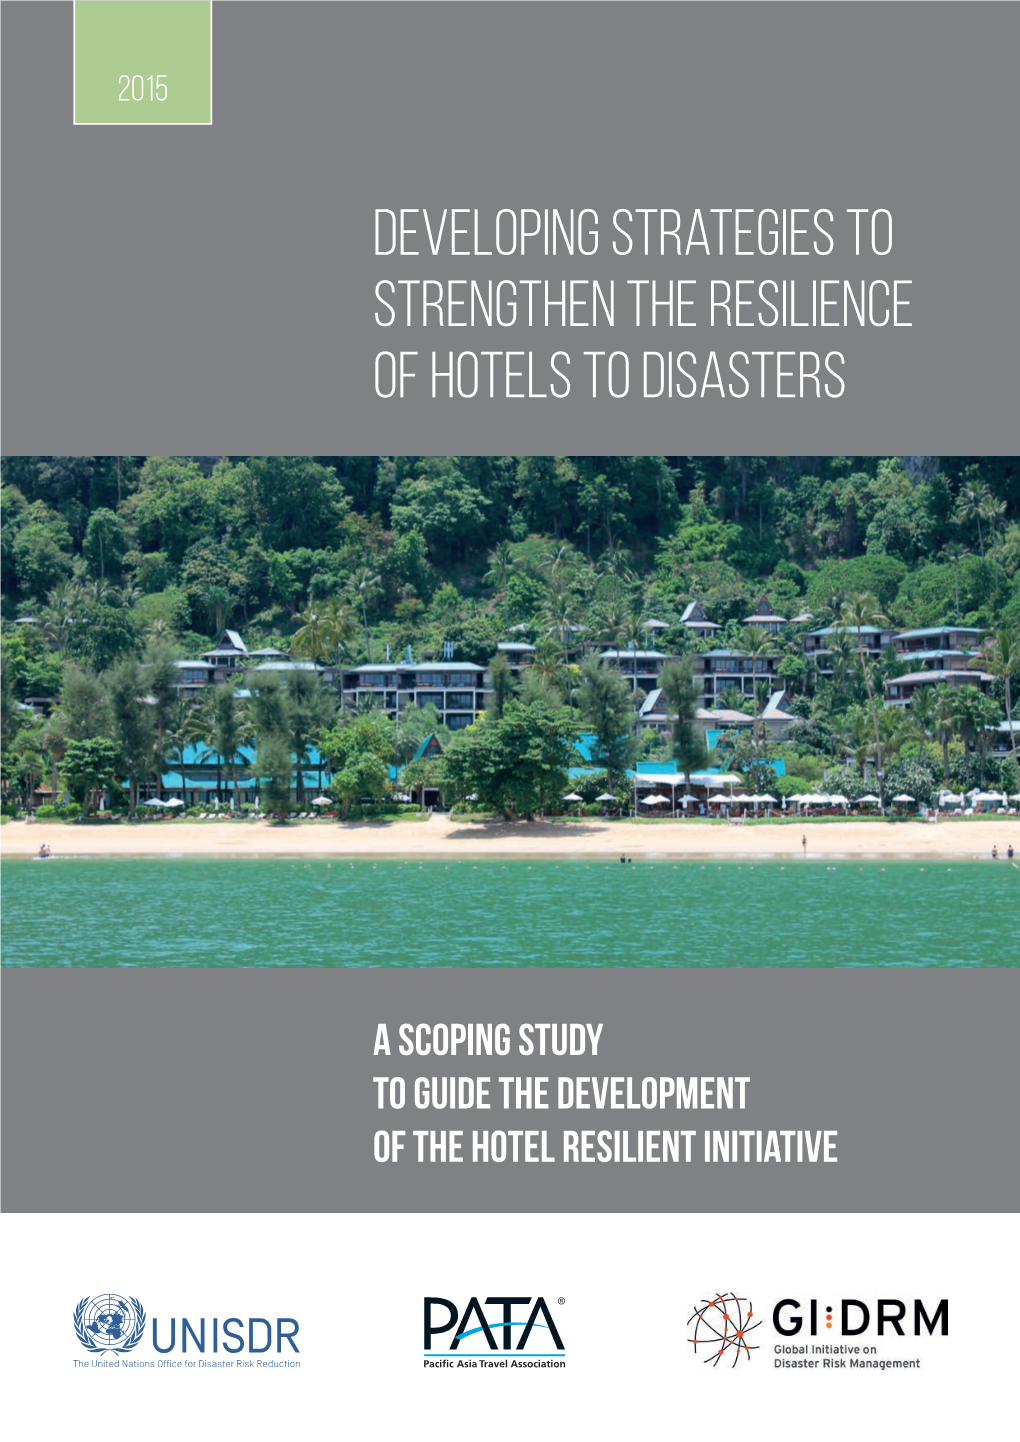 Developing Strategies to Strengthen the Resilience of Hotels to Disasters